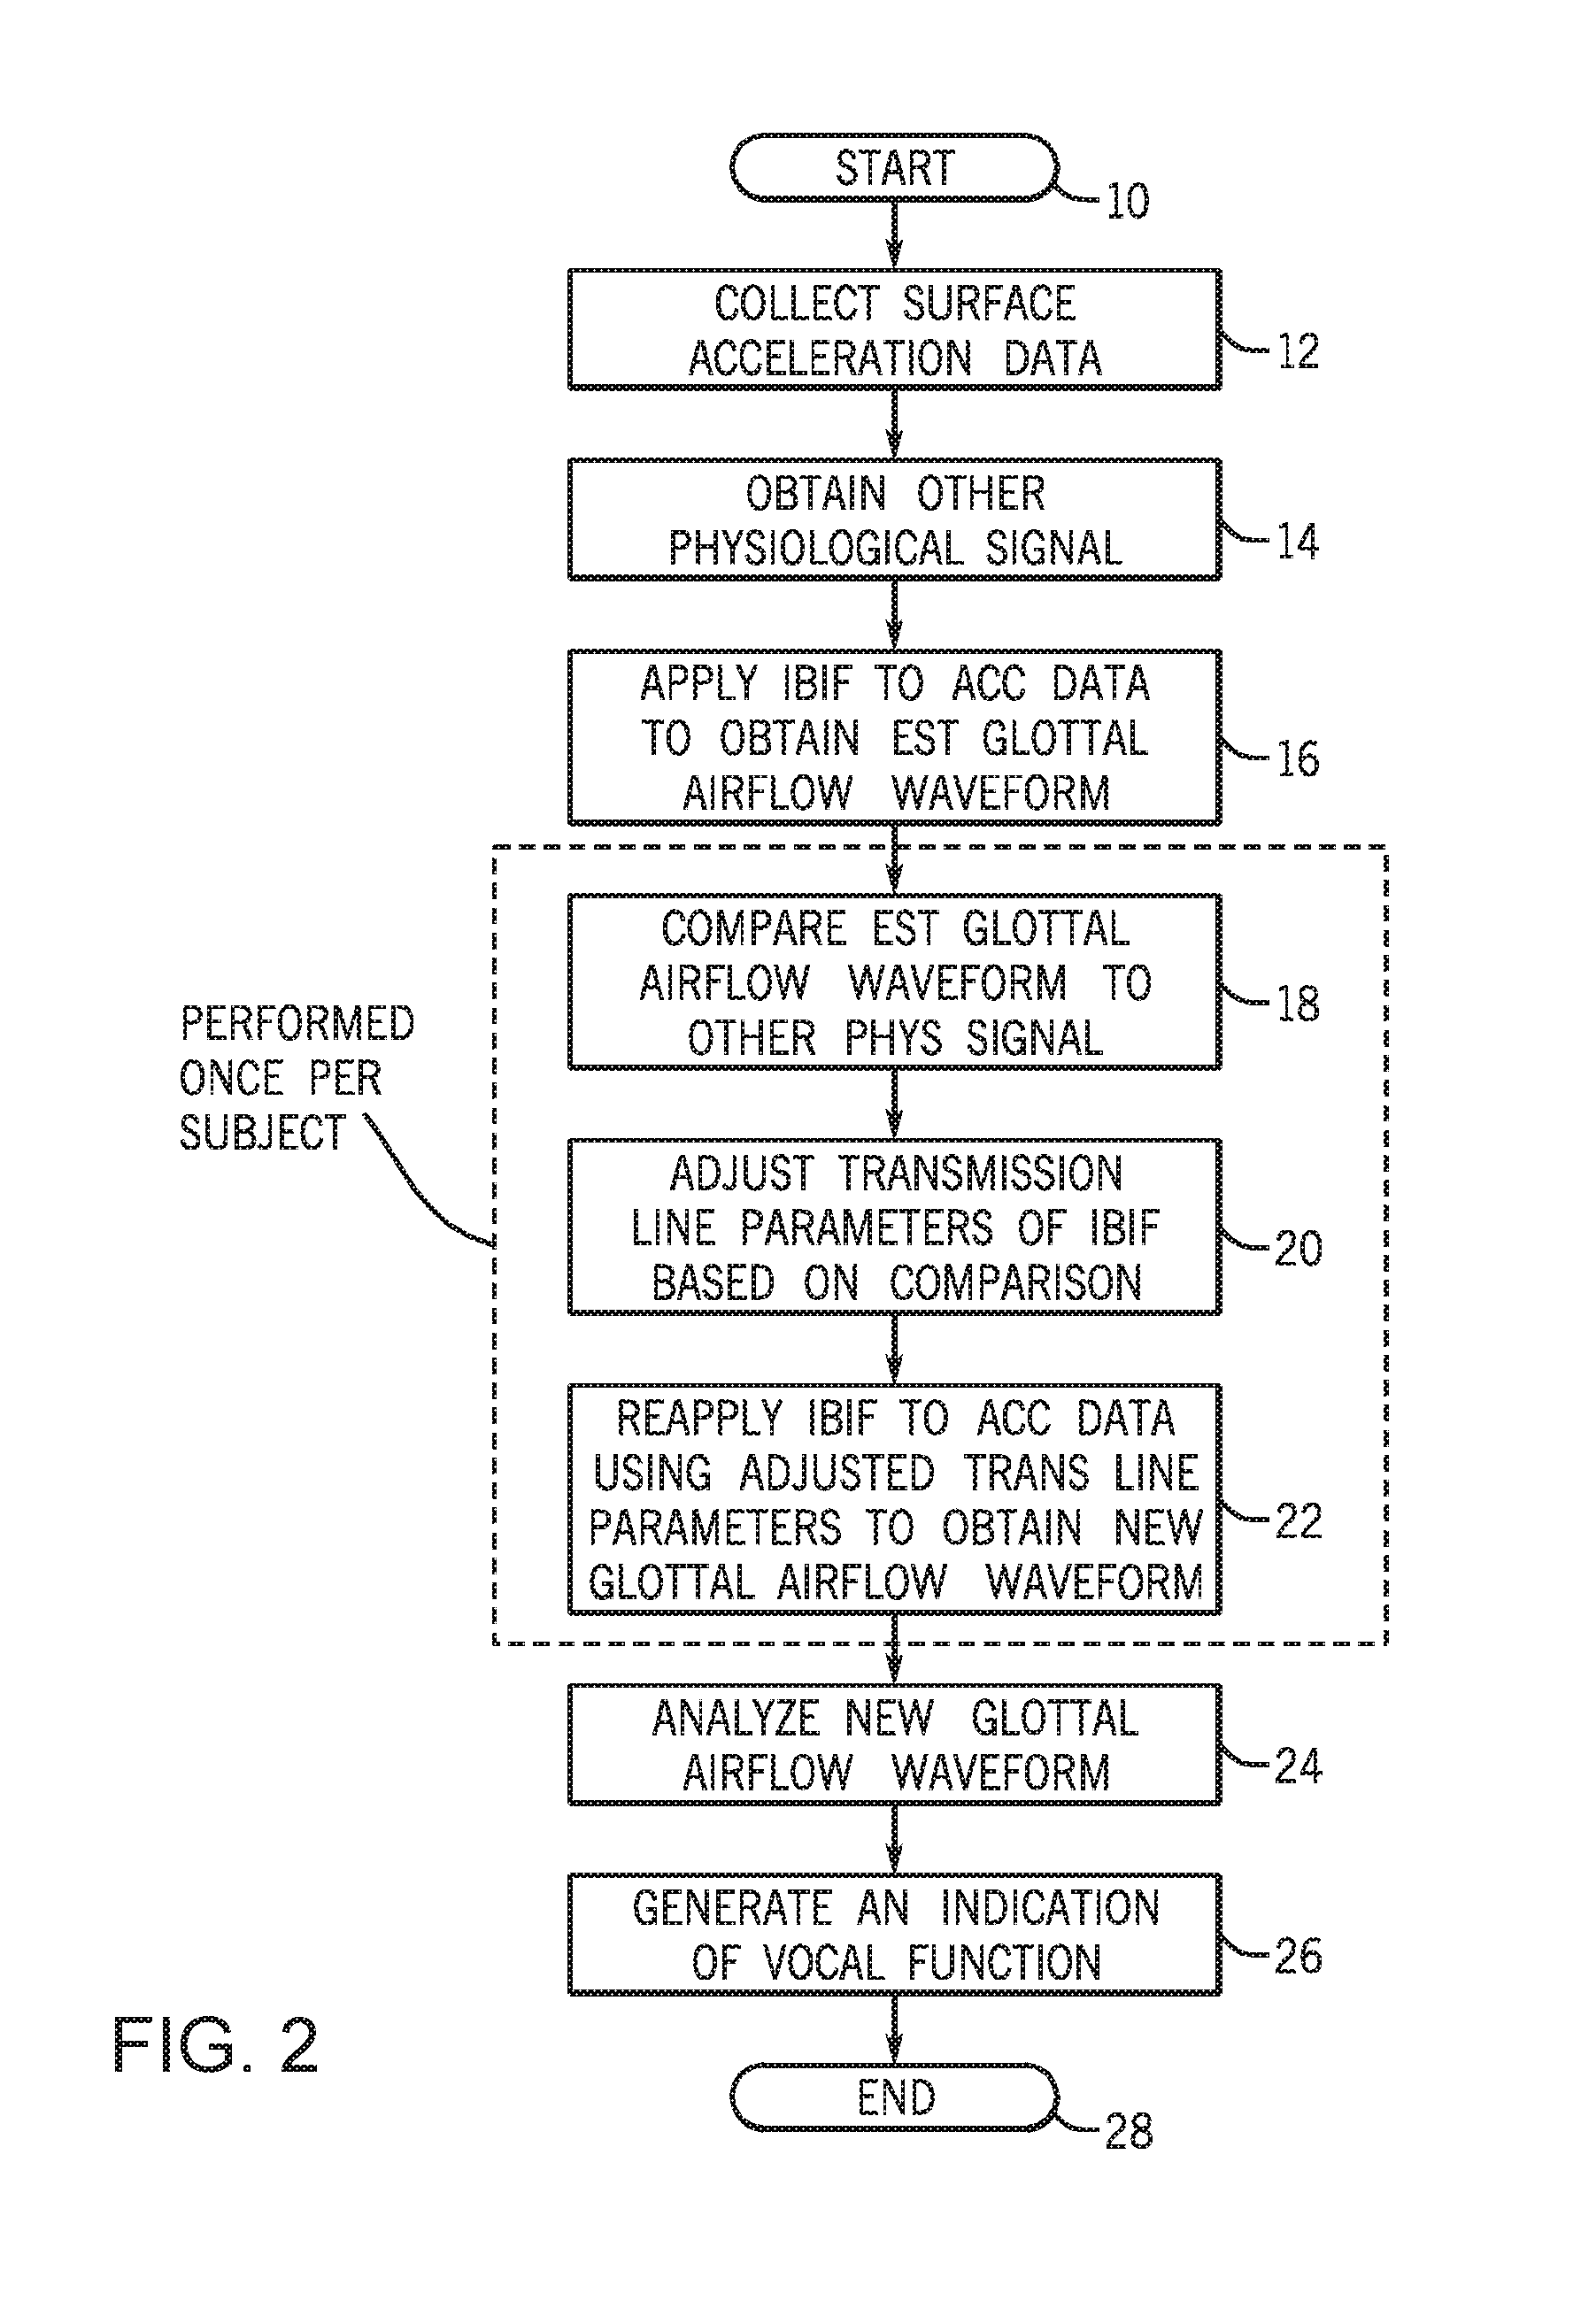 System and Method for Evaluating Vocal Function Using an Impedance-Based Inverse Filtering of Neck Surface Acceleration